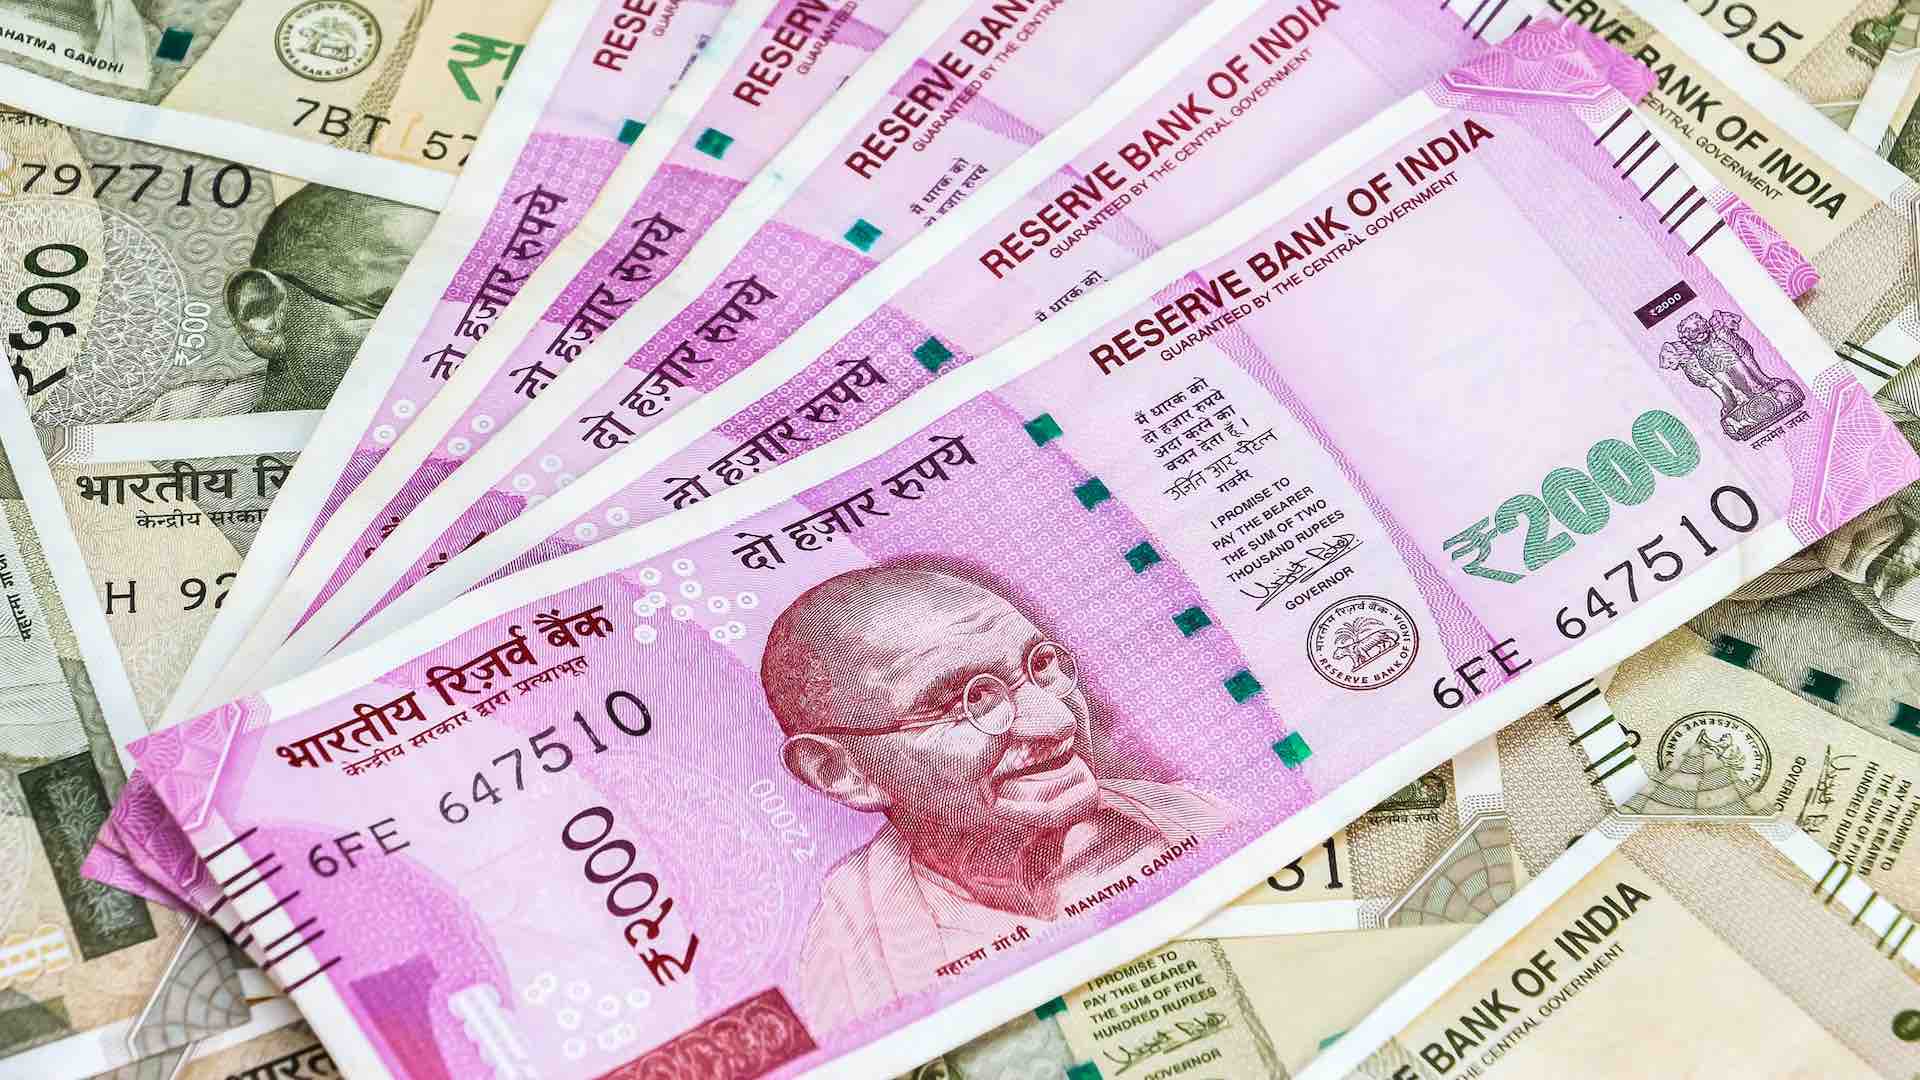 RBI withdraws Rs 2,000 notes from circulation, sets deadline for exchange or deposit